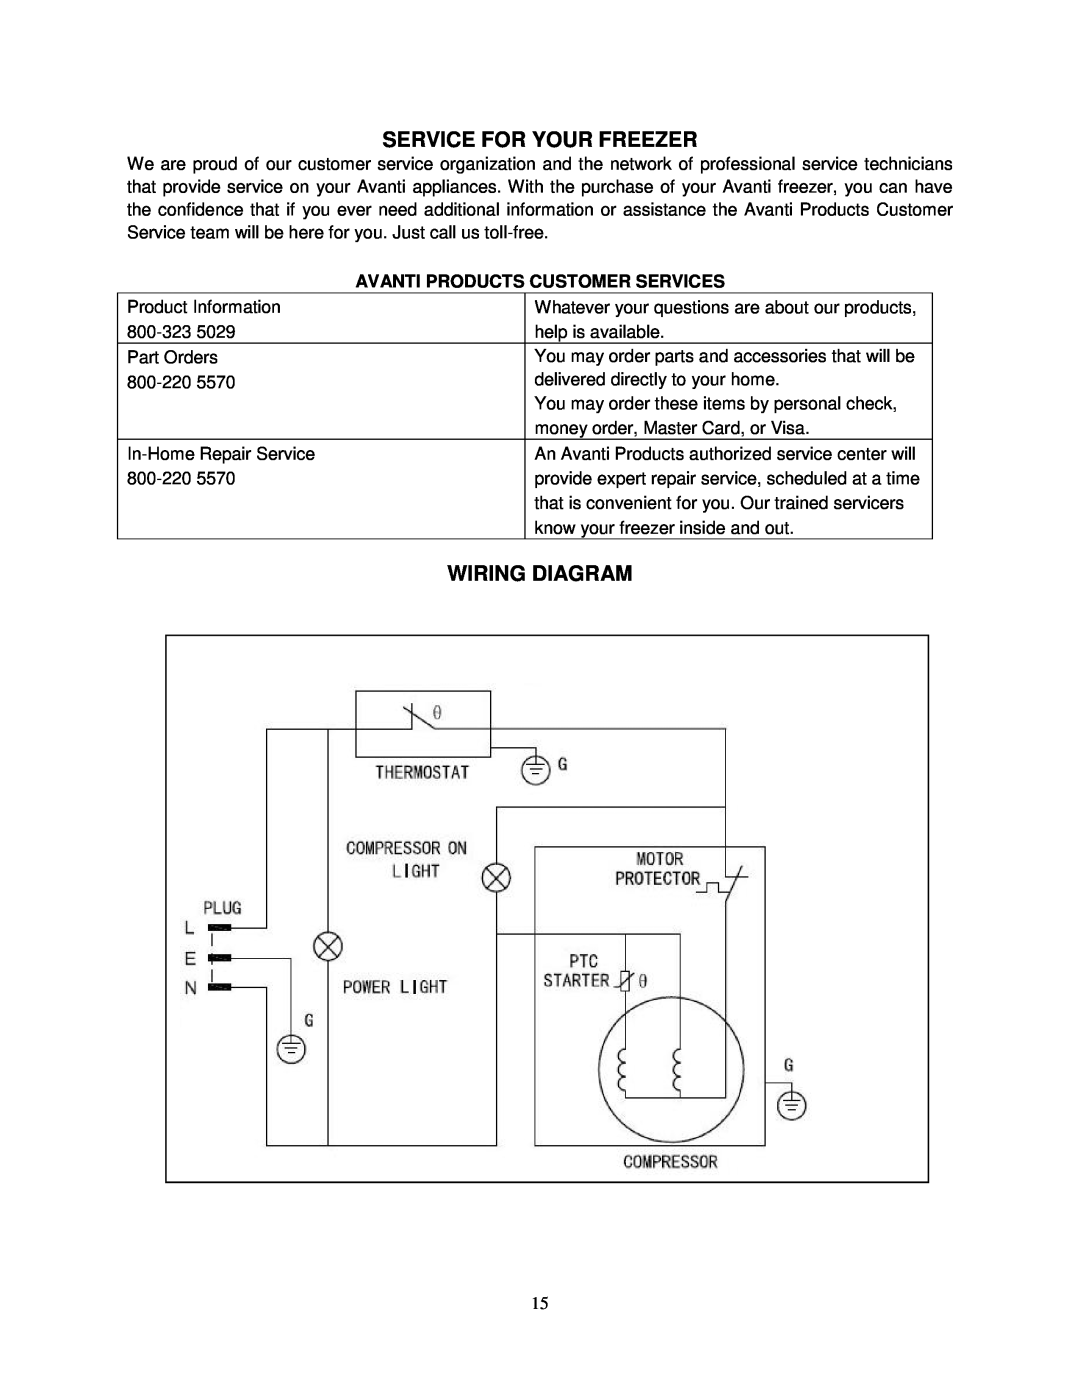 Avanti CF268G instruction manual Service For Your Freezer, Wiring Diagram, Avanti Products Customer Services 